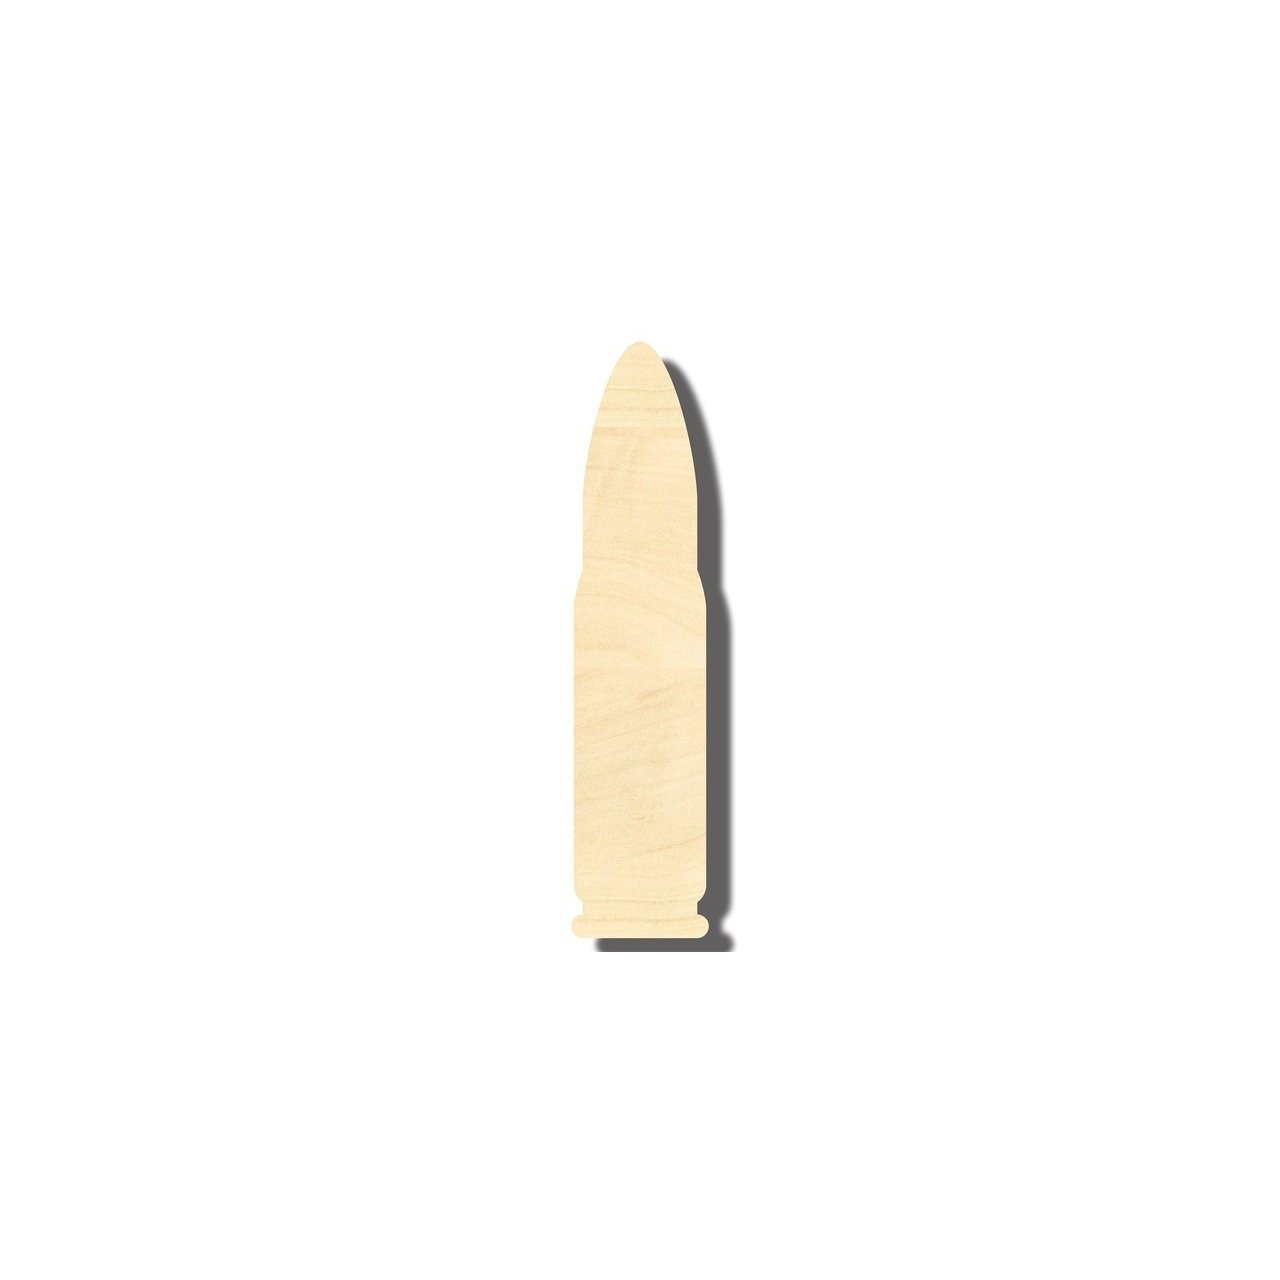 Bullet Shape Unfinished Wood Cutouts Variety of Sizes Style #1